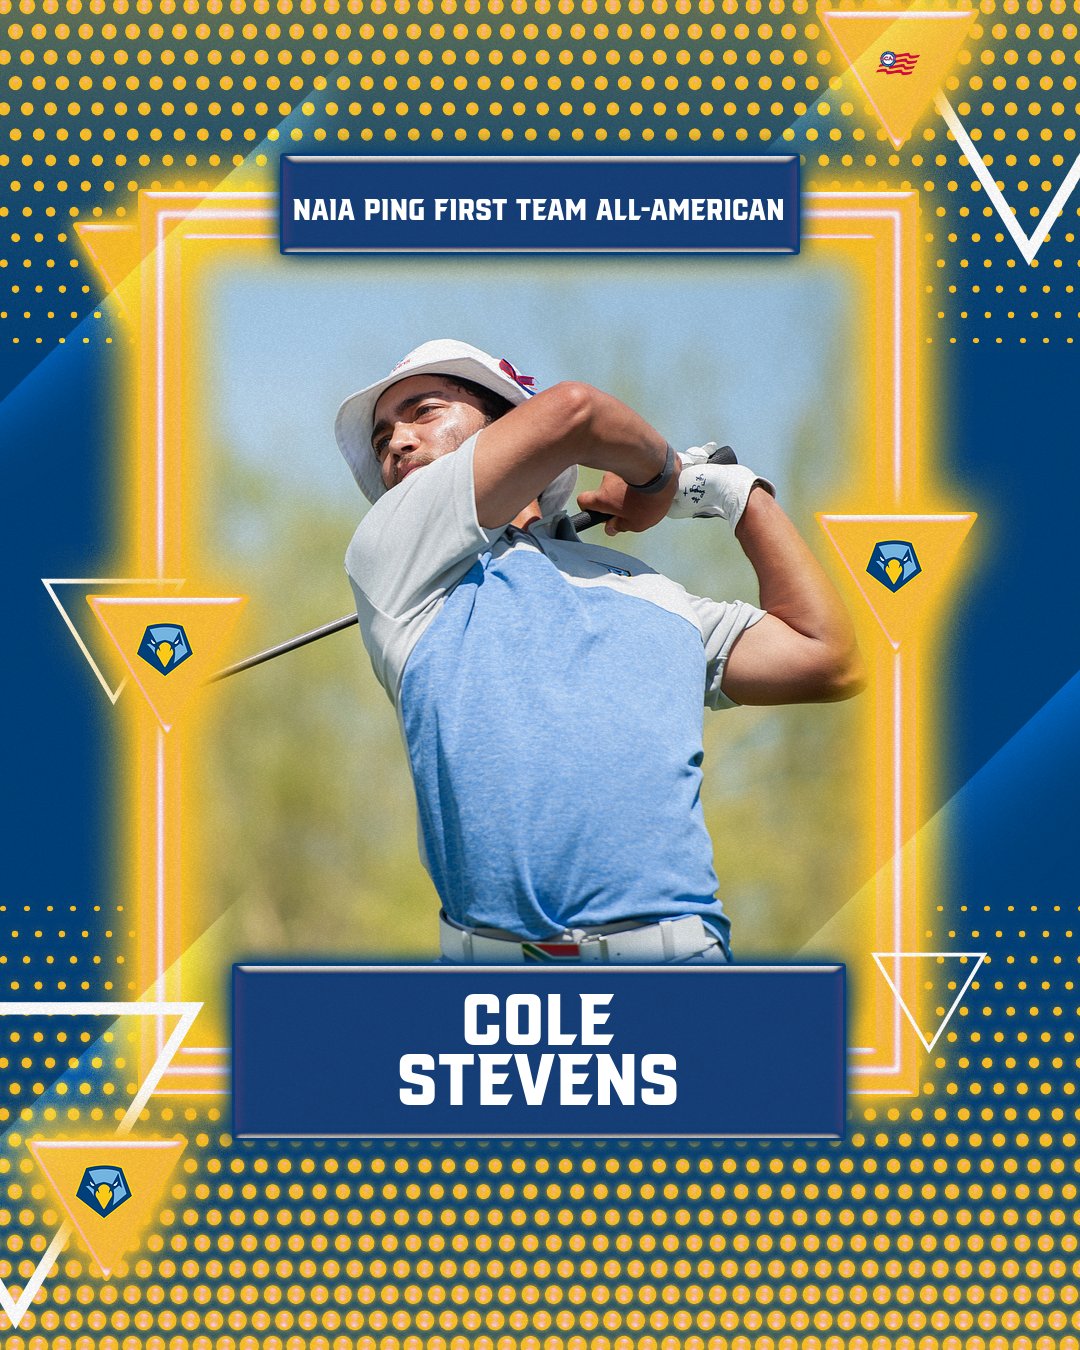 Cole Stevens named as a NAIA PING First Team All-American